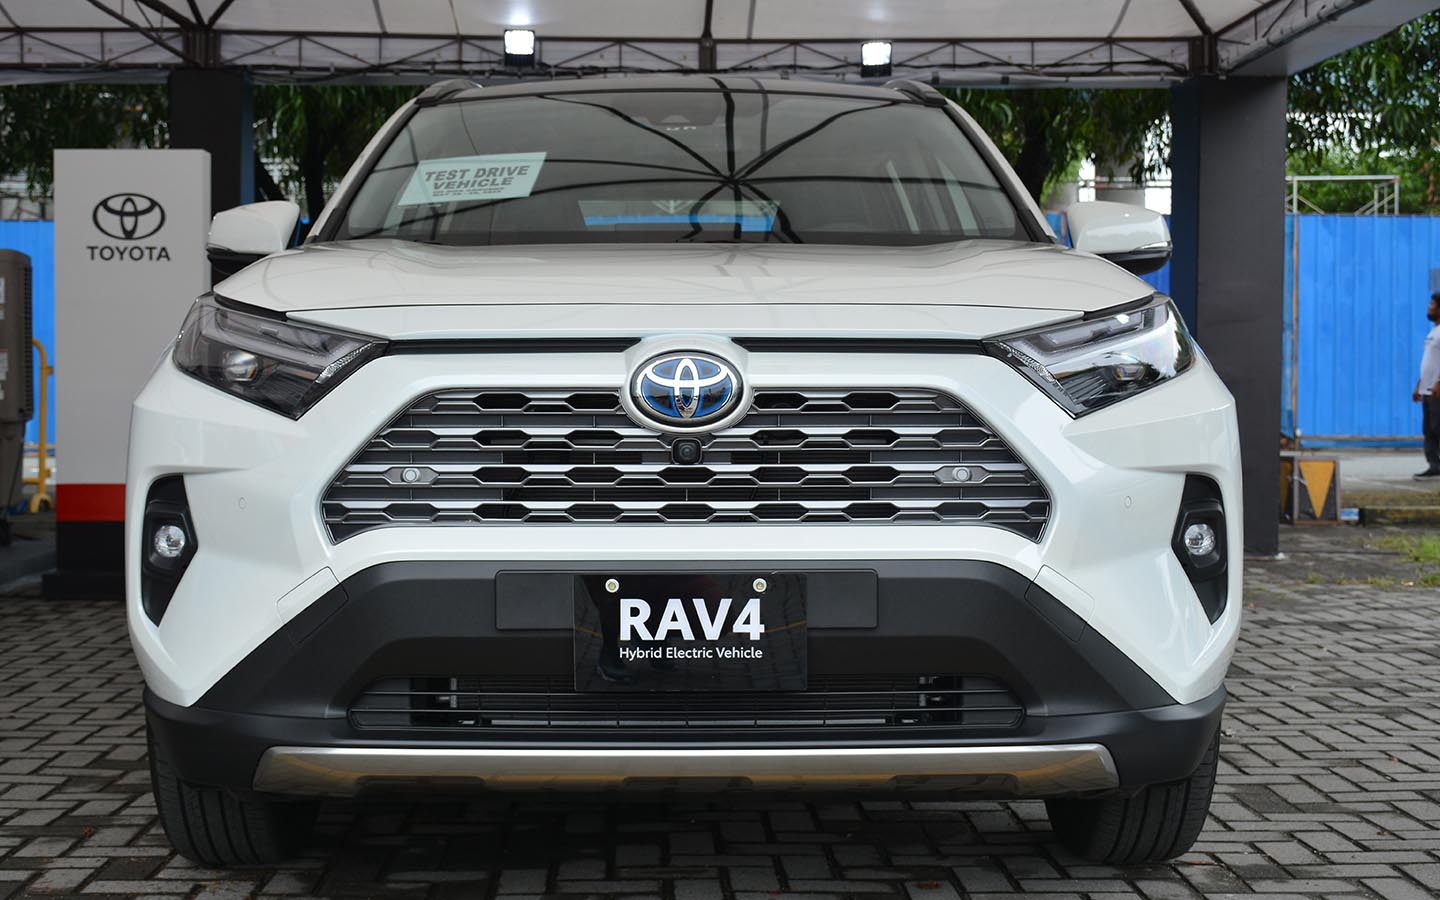 the Toyota RAV 4 is also among the most sought after suvs in the uae